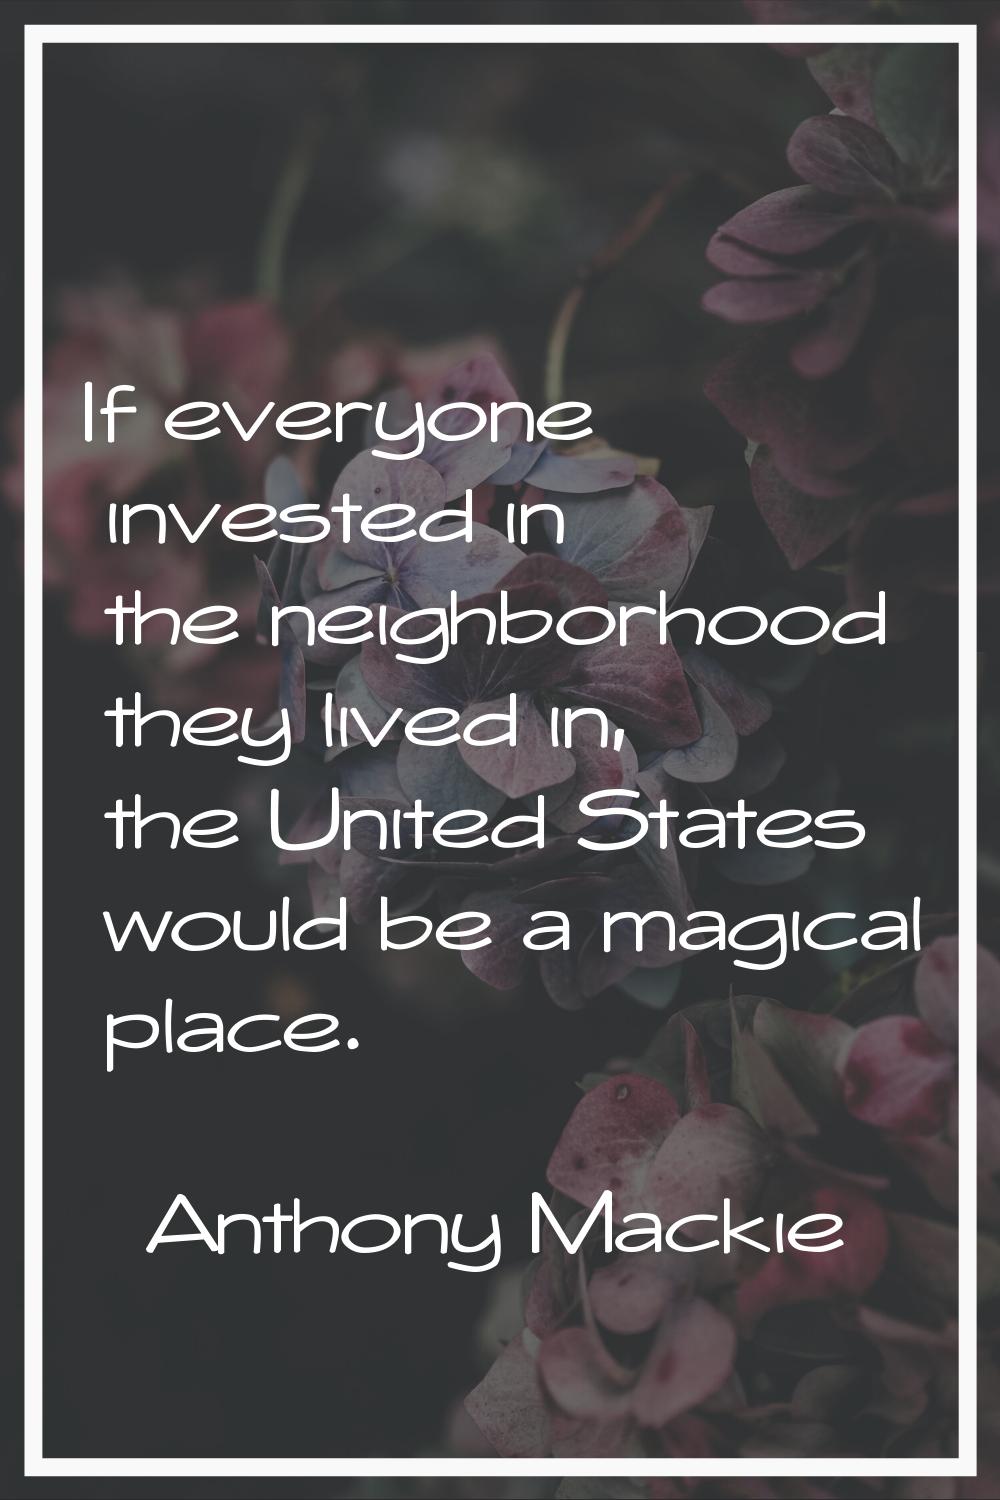 If everyone invested in the neighborhood they lived in, the United States would be a magical place.